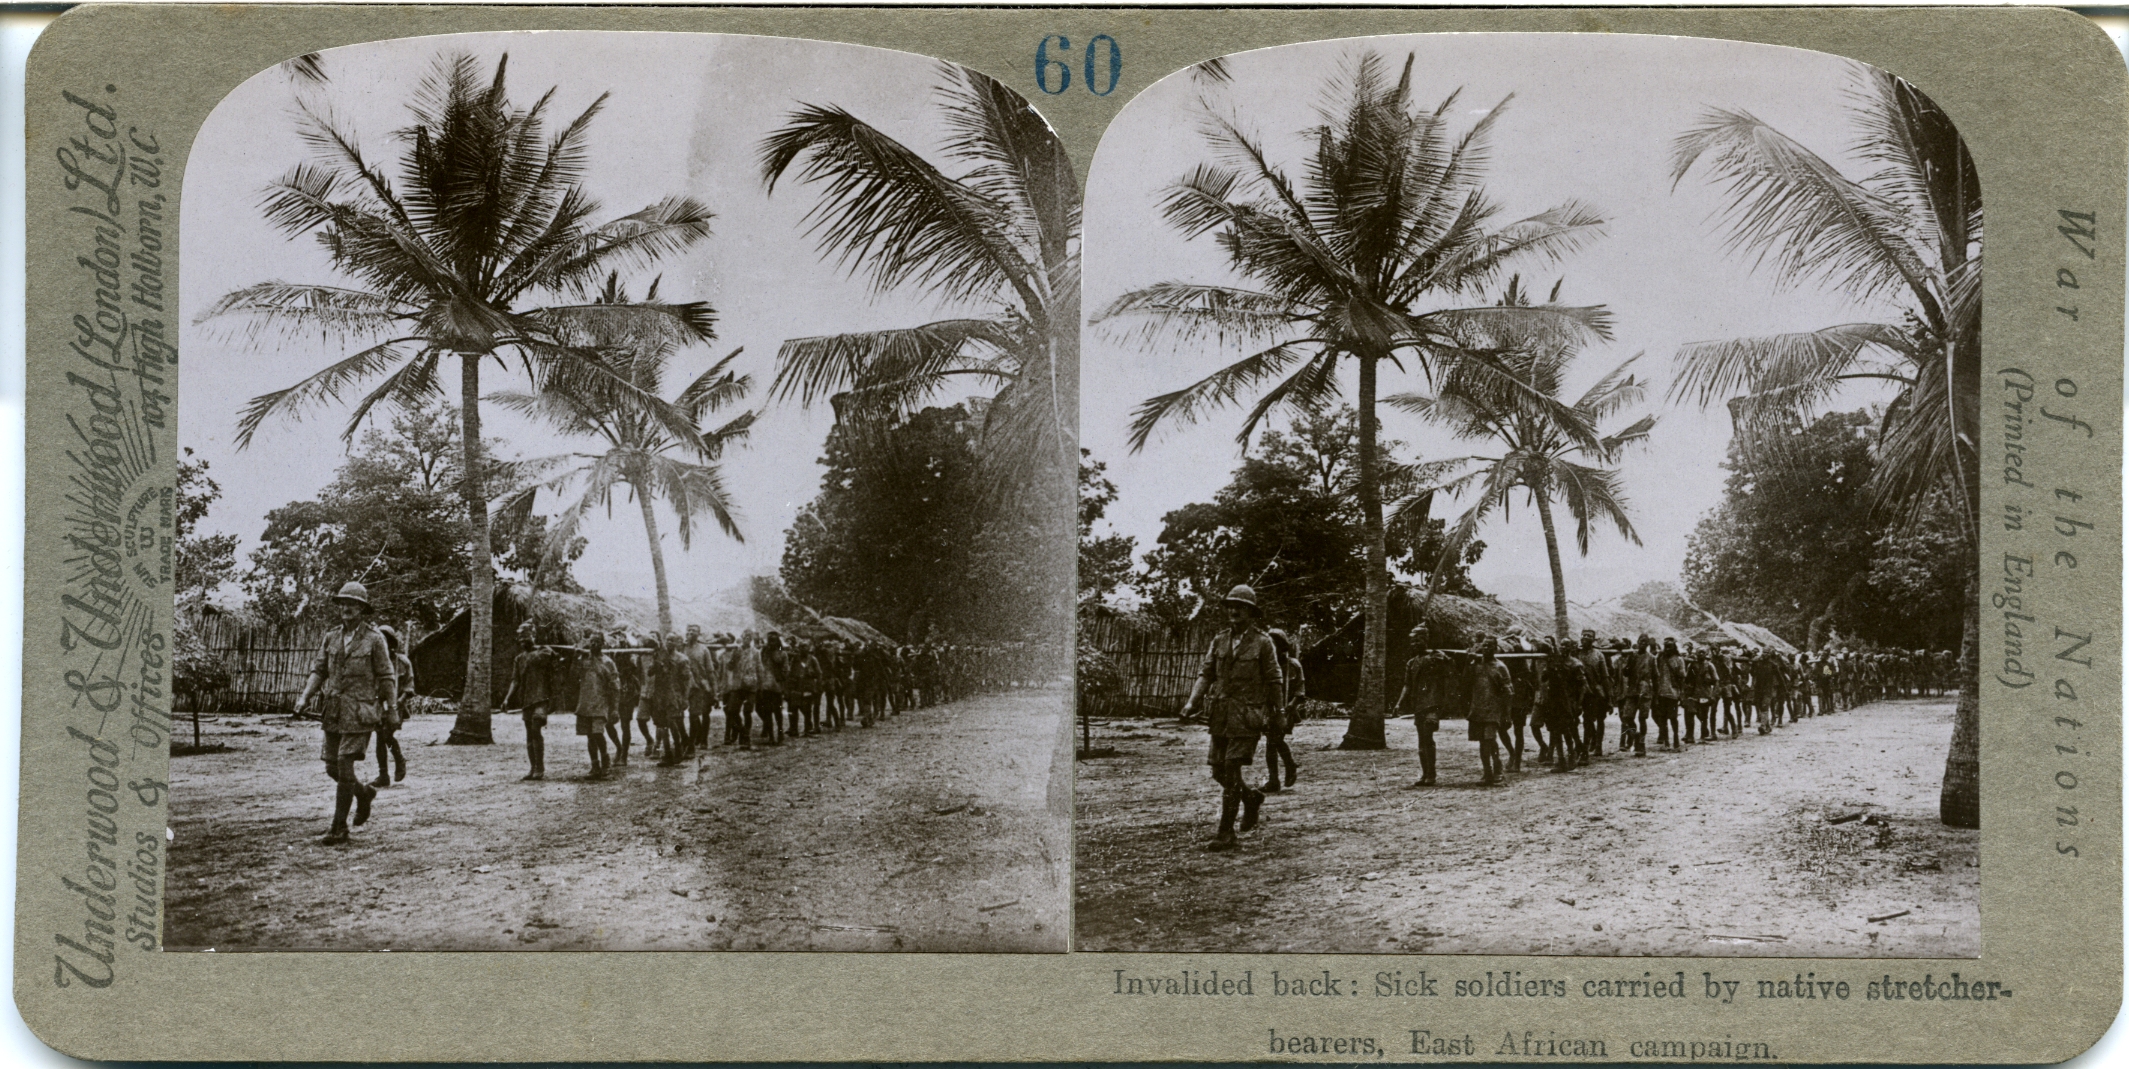 Invalided back: Sick soldiers carried by native stretcher-bearers, East Africa campaign